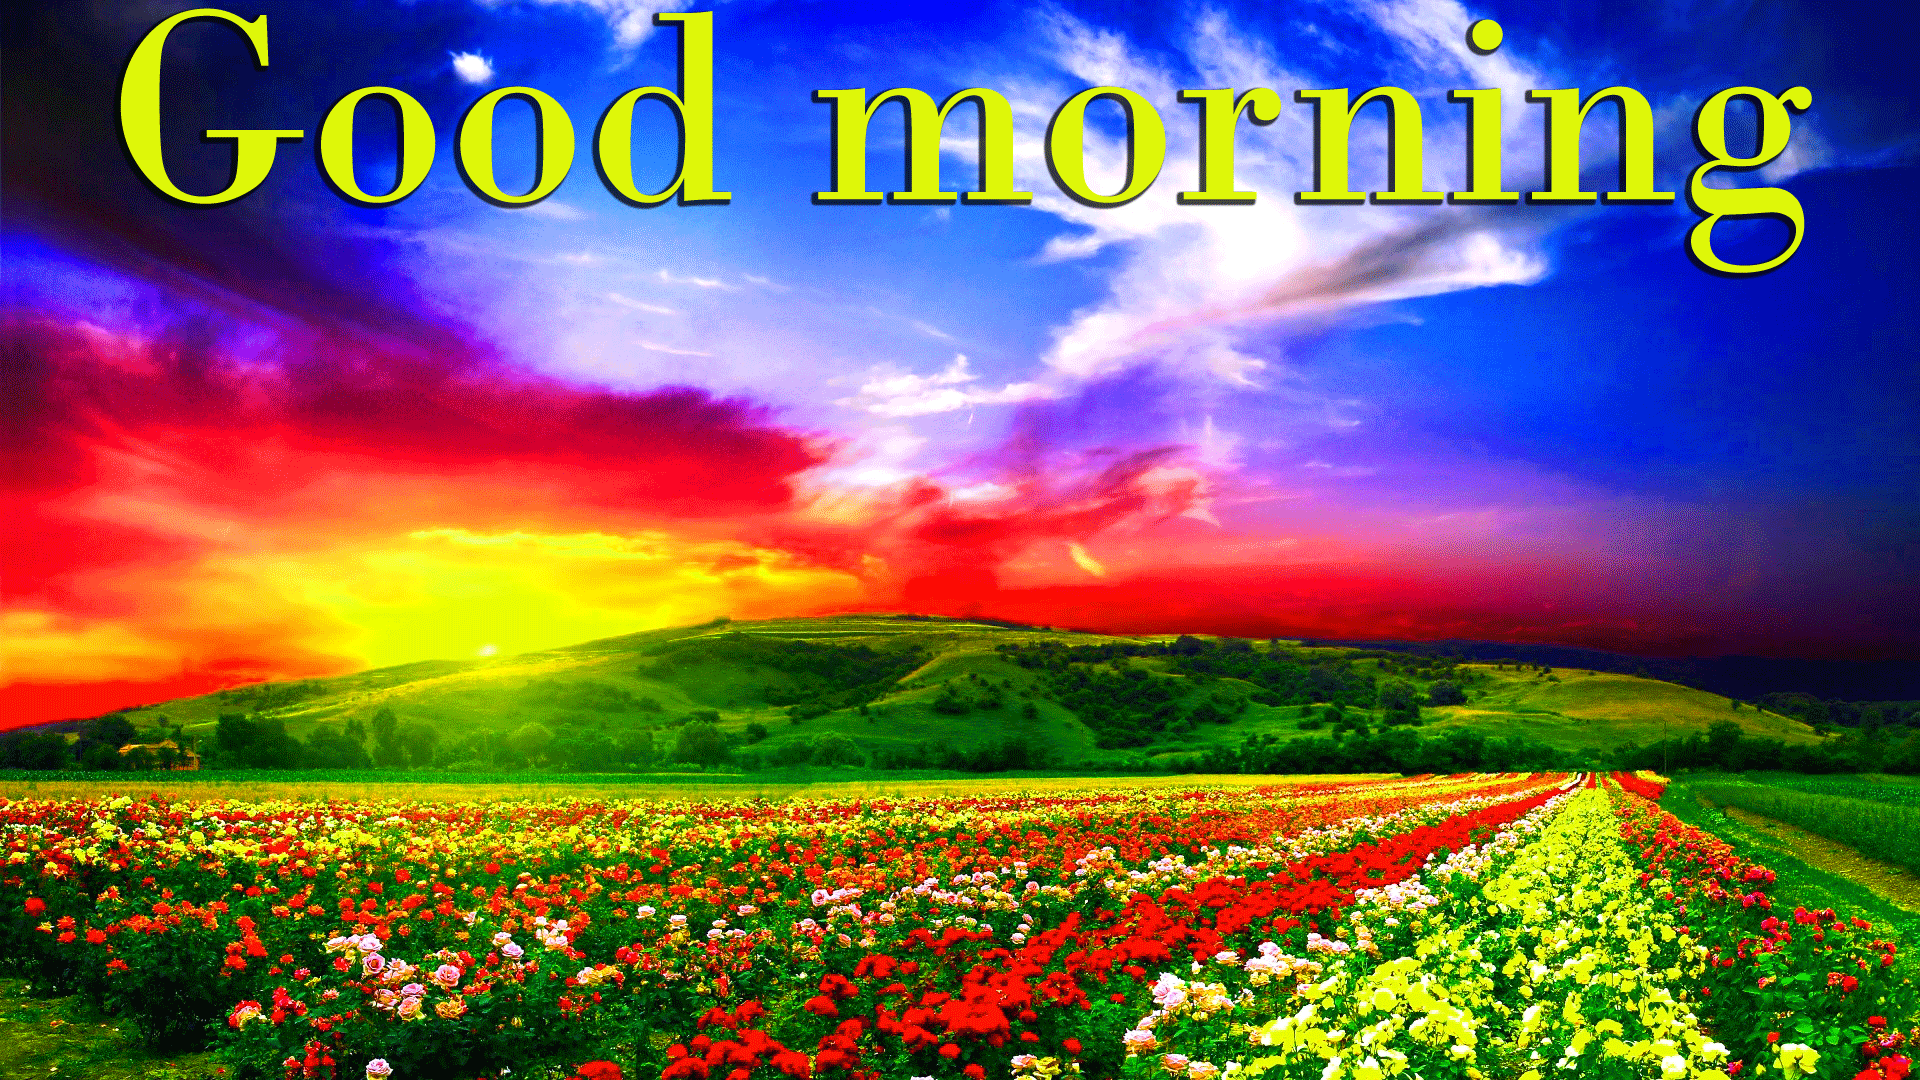 Good Morning Wallpapers Download - Wallpaper Cave